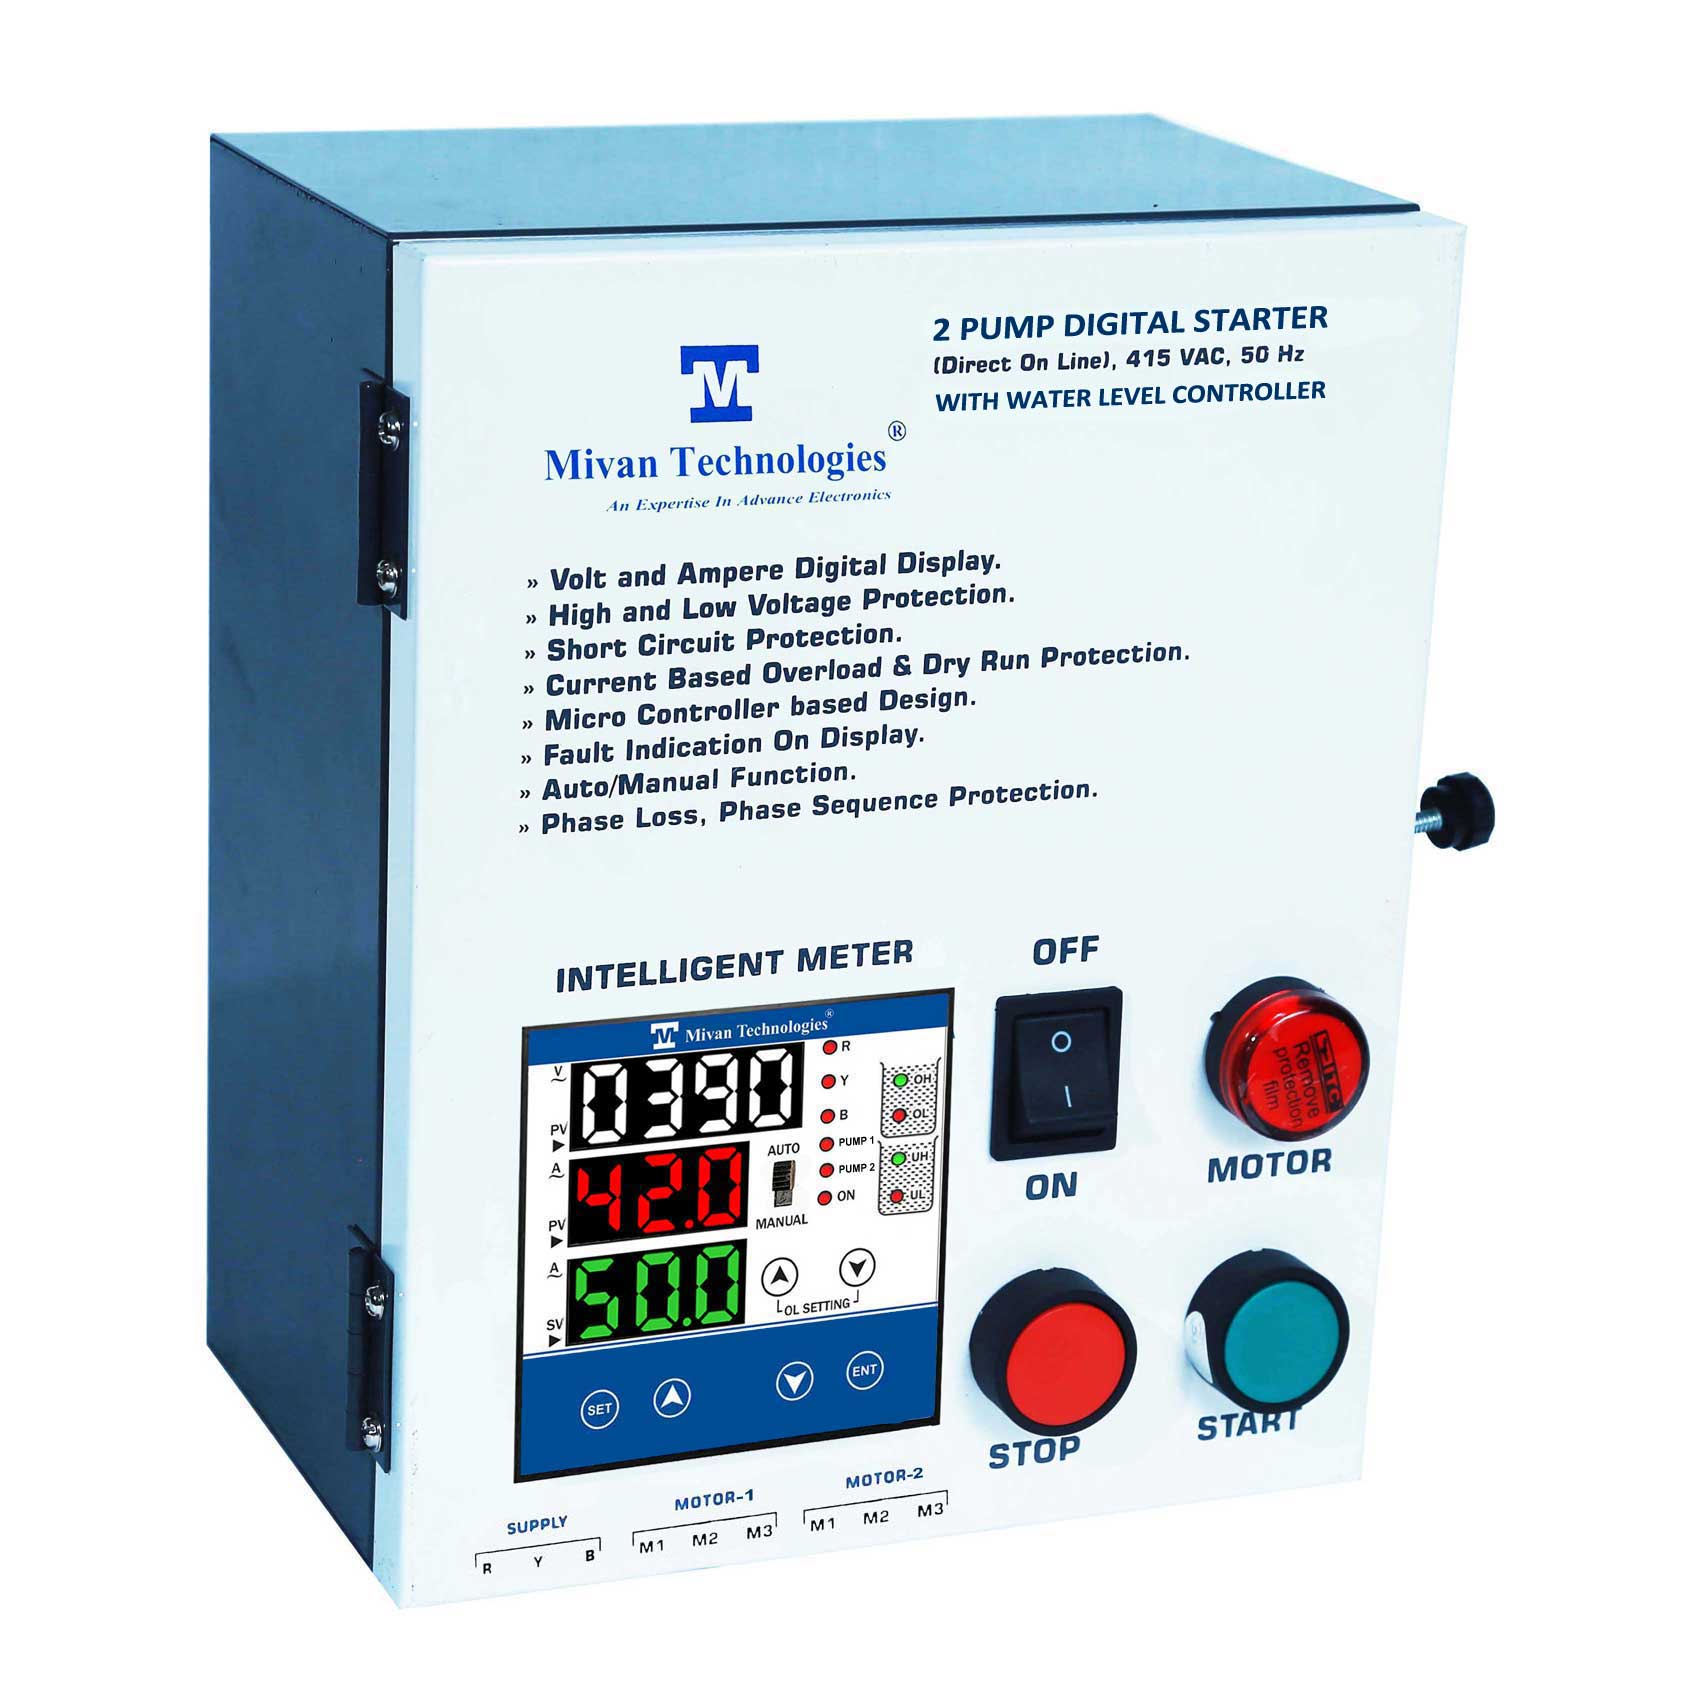 DOL DP 3 PHASE 2 PUMP DOL STARTER with water level controller HV LV OL Dry protection with Auto switch spp and timer suitable up to 10 HP operate 2 pump one by one